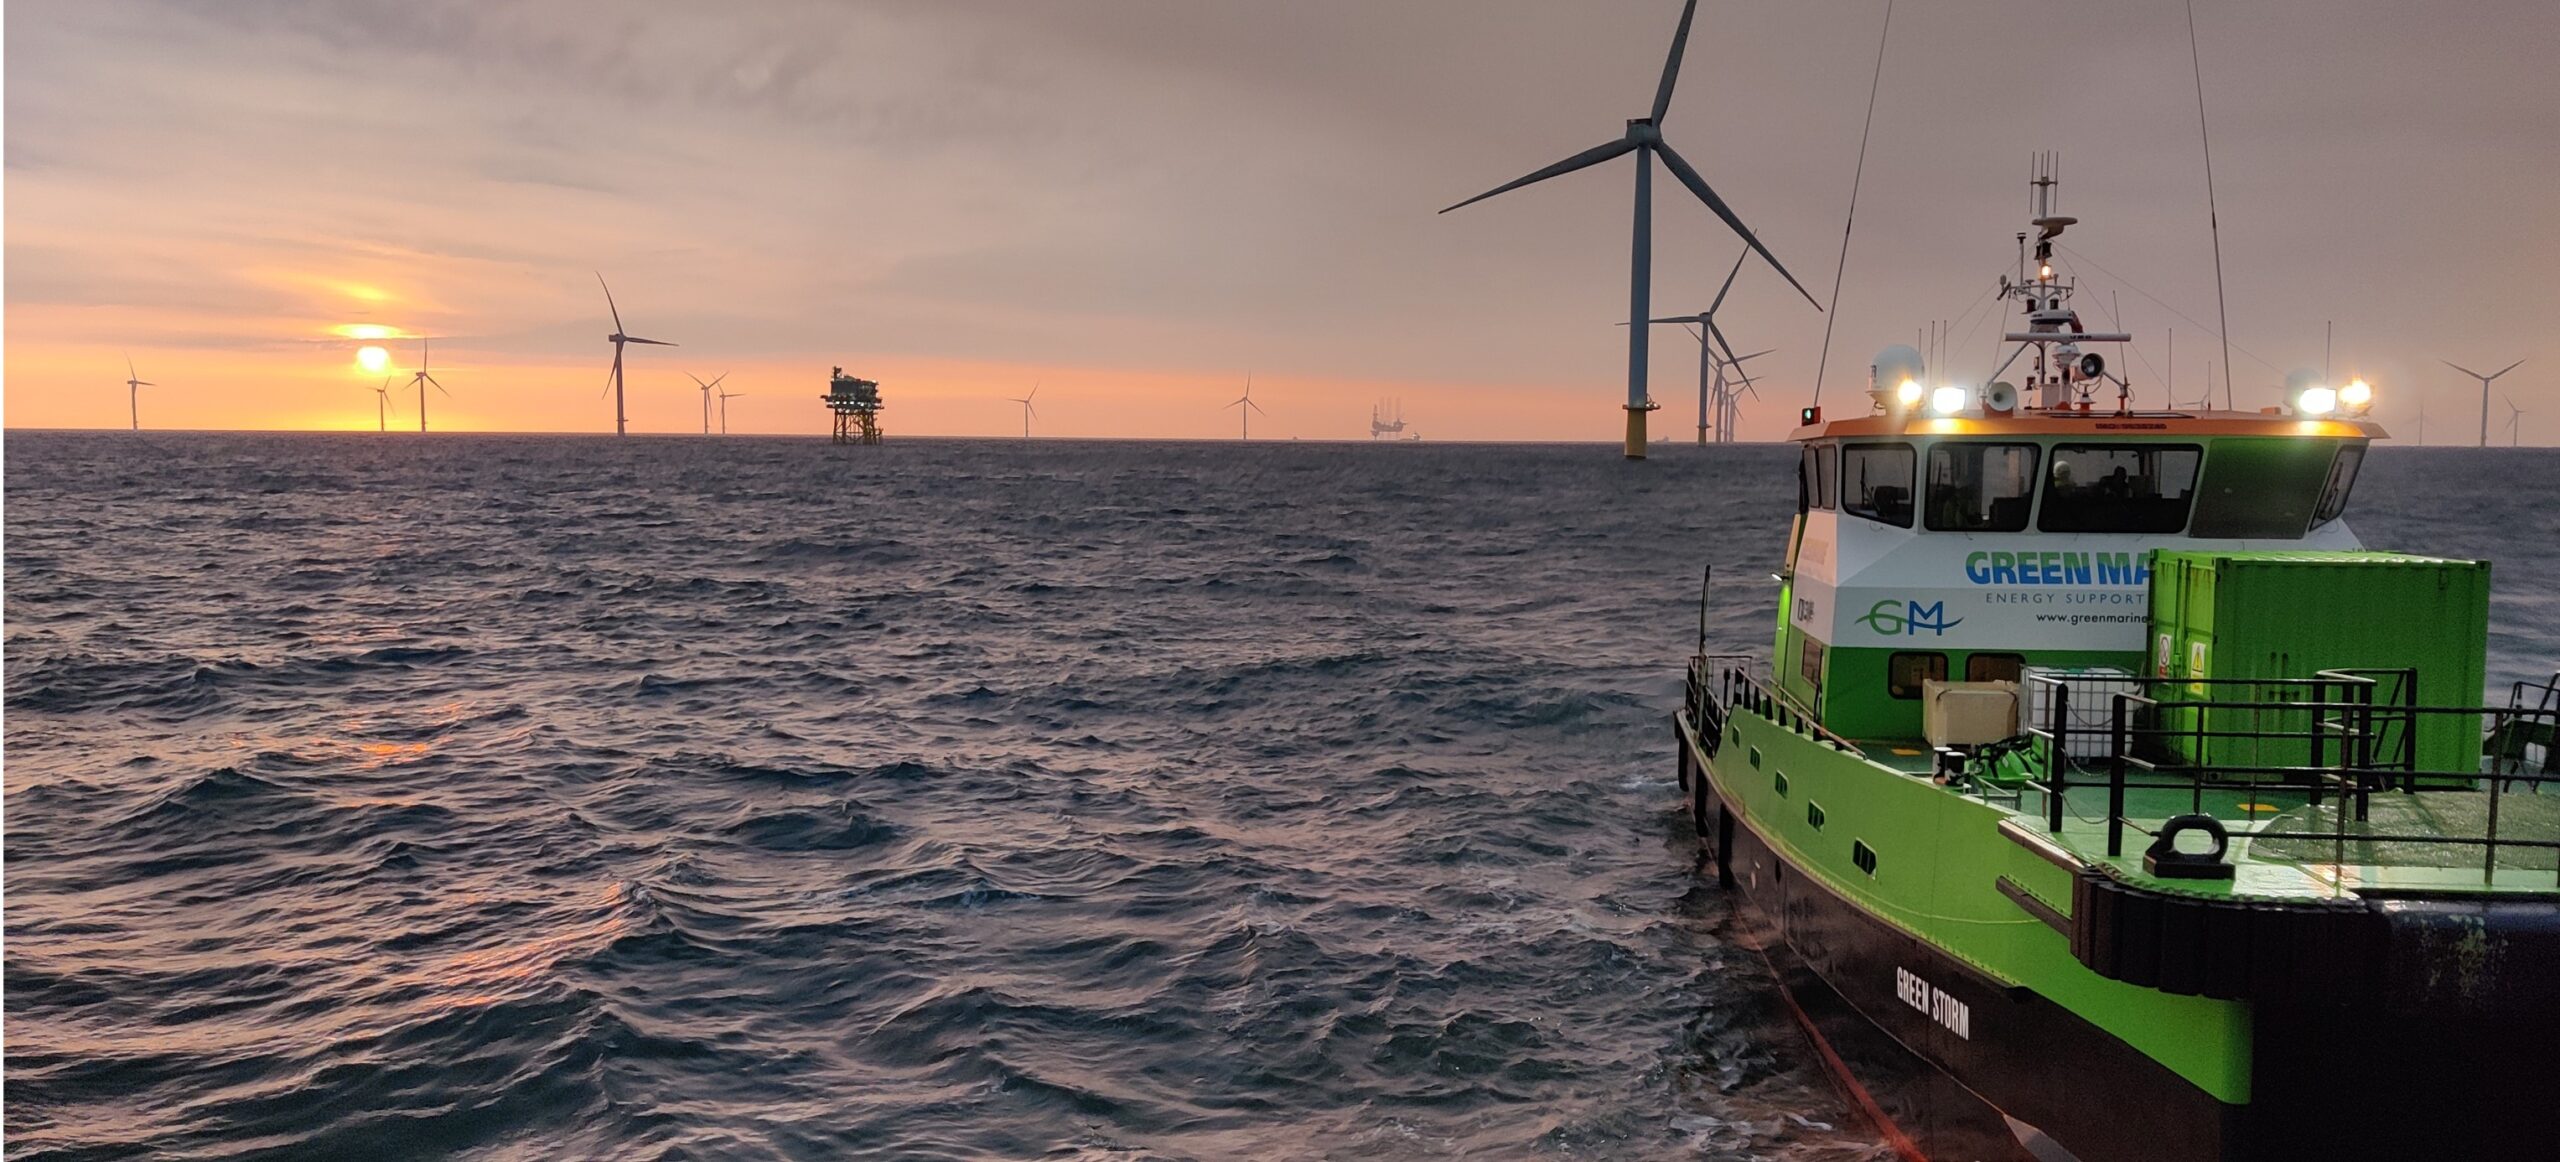 Offshore wind energy boom for Green Marine UK following high-profile projects